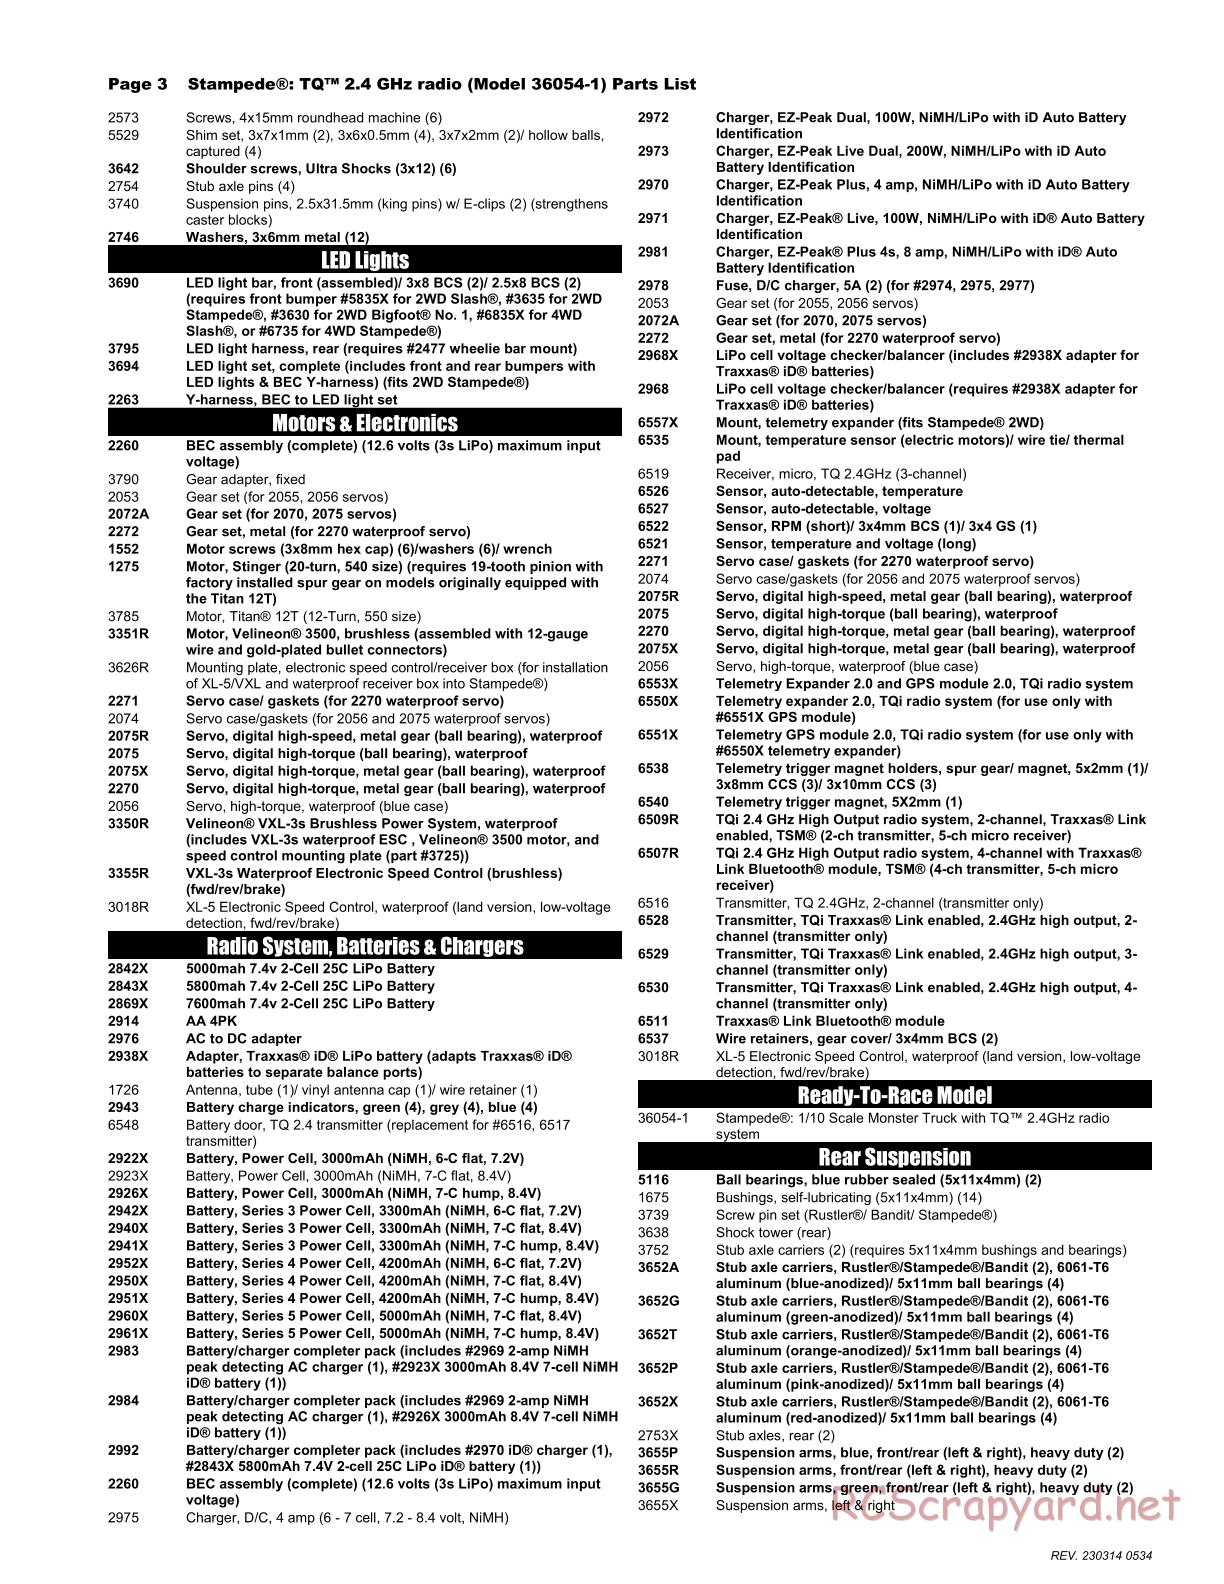 Traxxas - Stampede XL-5 (2015) - Parts List - Page 3